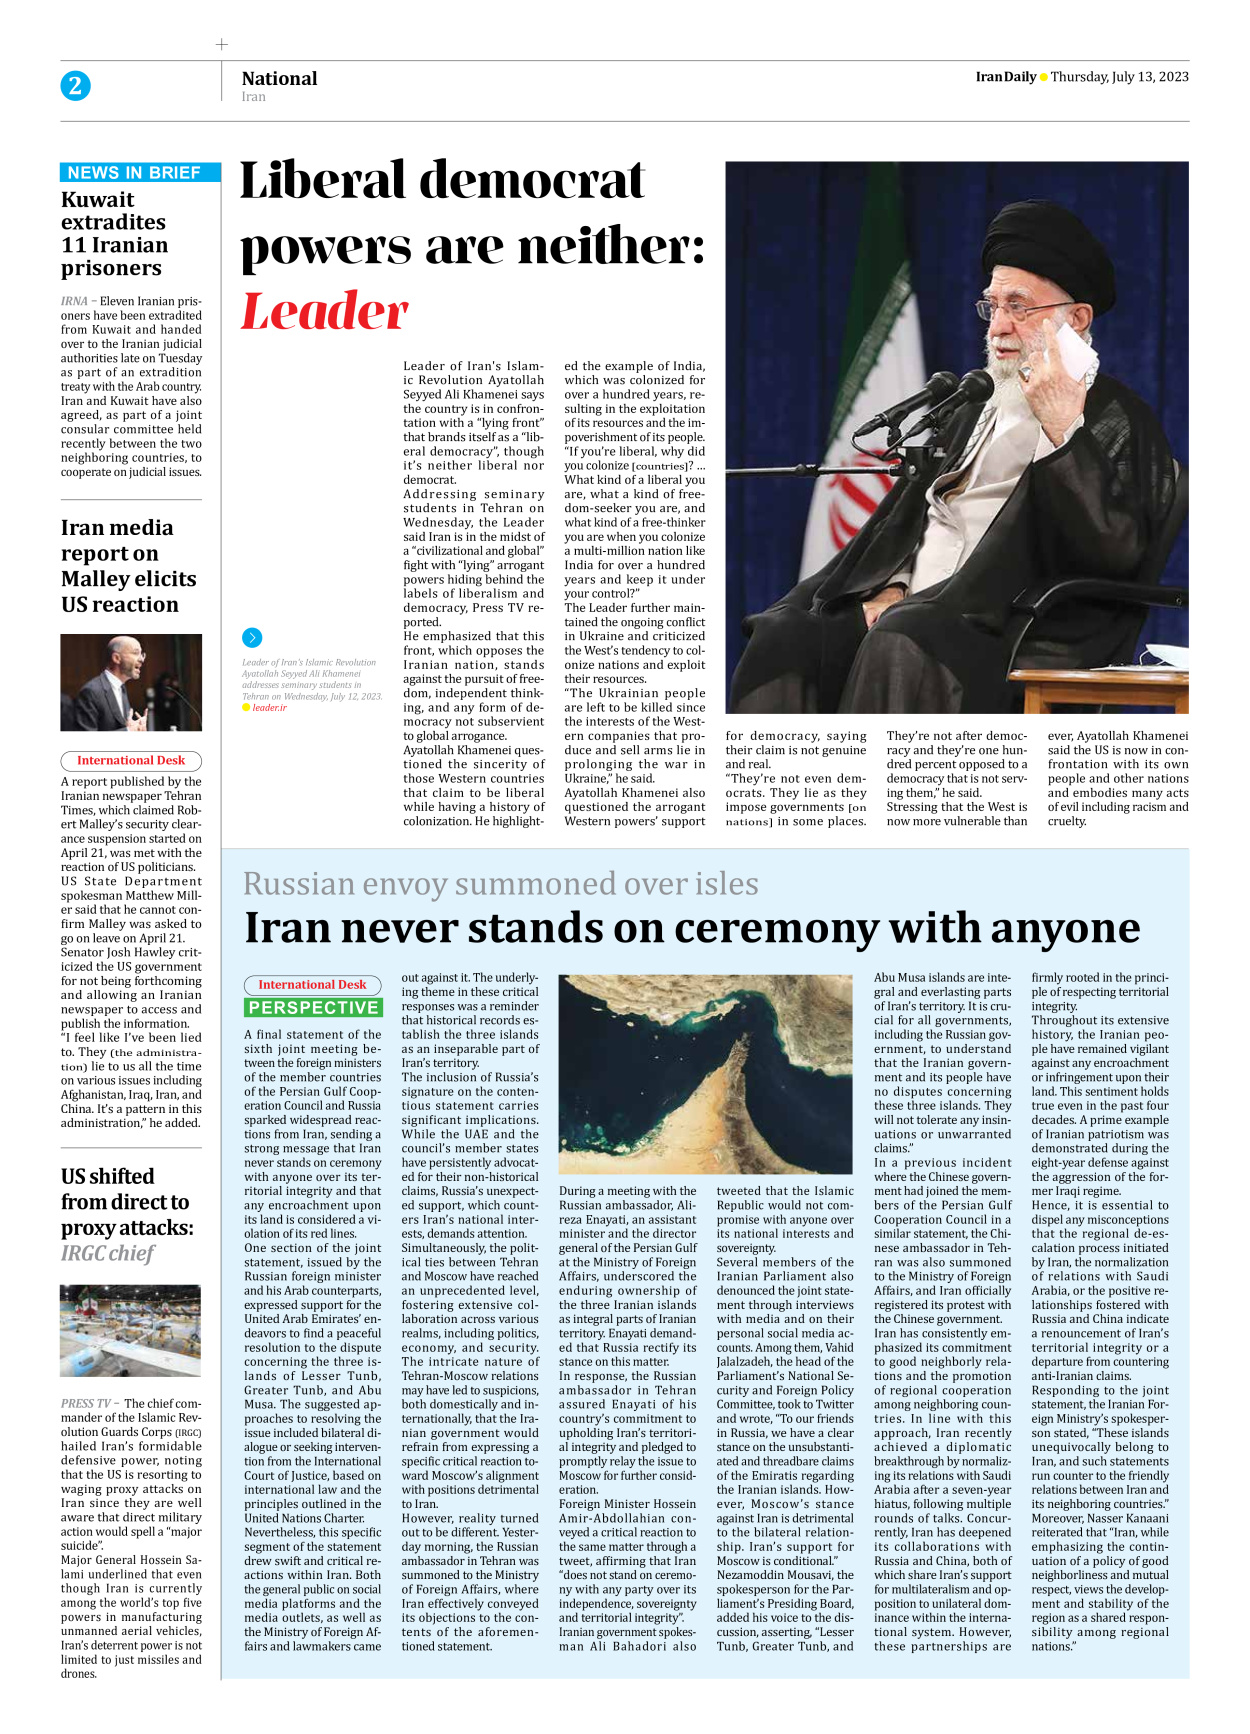 Iran Daily - Number Seven Thousand Three Hundred and Thirty Eight - 13 July 2023 - Page 2